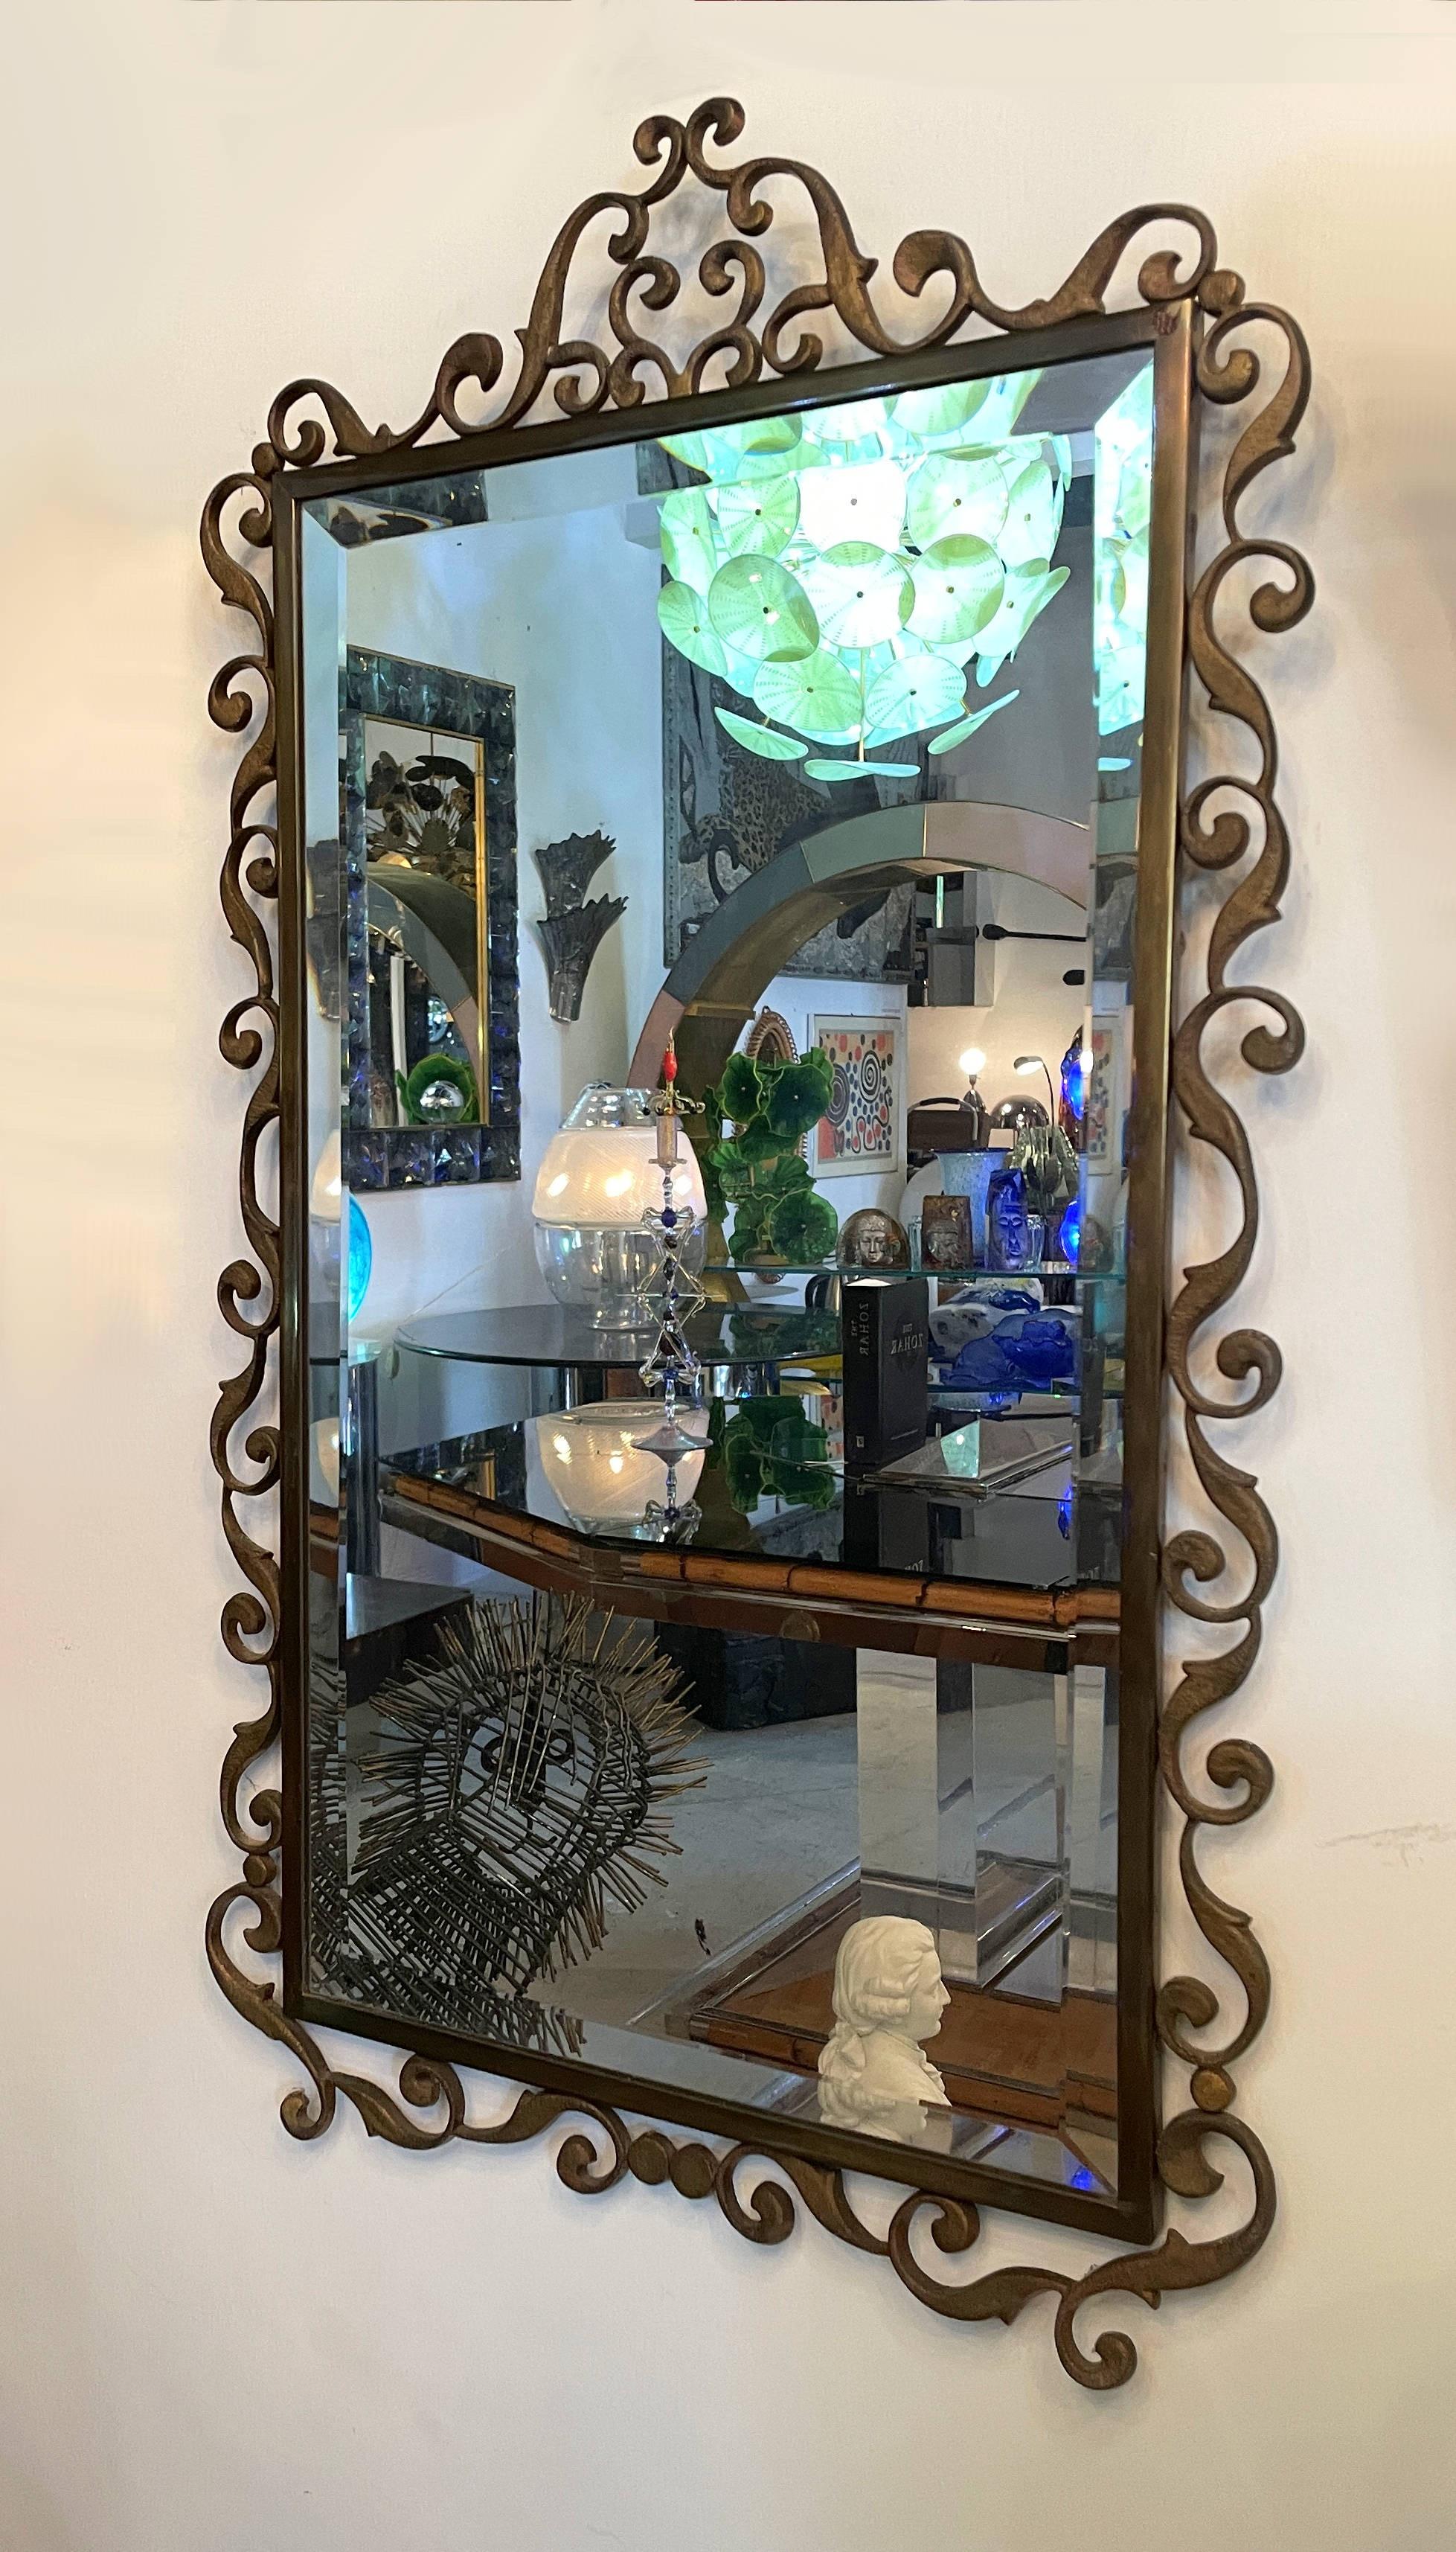 Very chic, yet ornate, bronze scrolling framed mirror. The bronze frame and scrolls are sturdy, heavy and of great quality. This elegant Italian treasure mixes well in modern, mid-century or old world interiors.